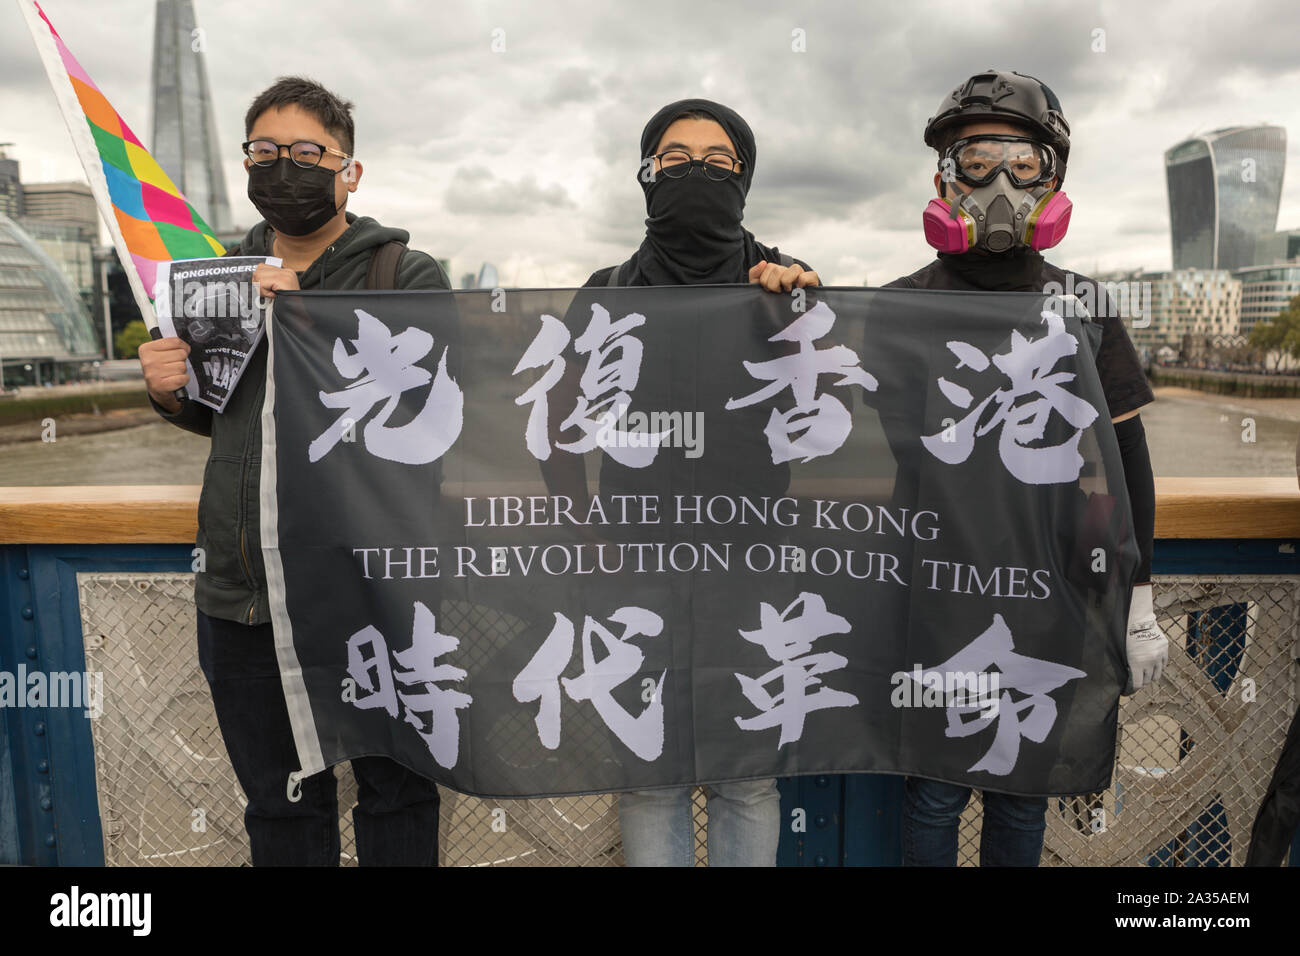 London, UK. 5th Oct, 2019. Chinese artist Badiucao and supporters join hands in a human chain, a showing of solidarity with protesters in Hong Kong. The Lennon Wall flag, symbolising Hong Kongs fight for freedom is also symbolically raised. Penelope Barritt/Alamy Live News Stock Photo